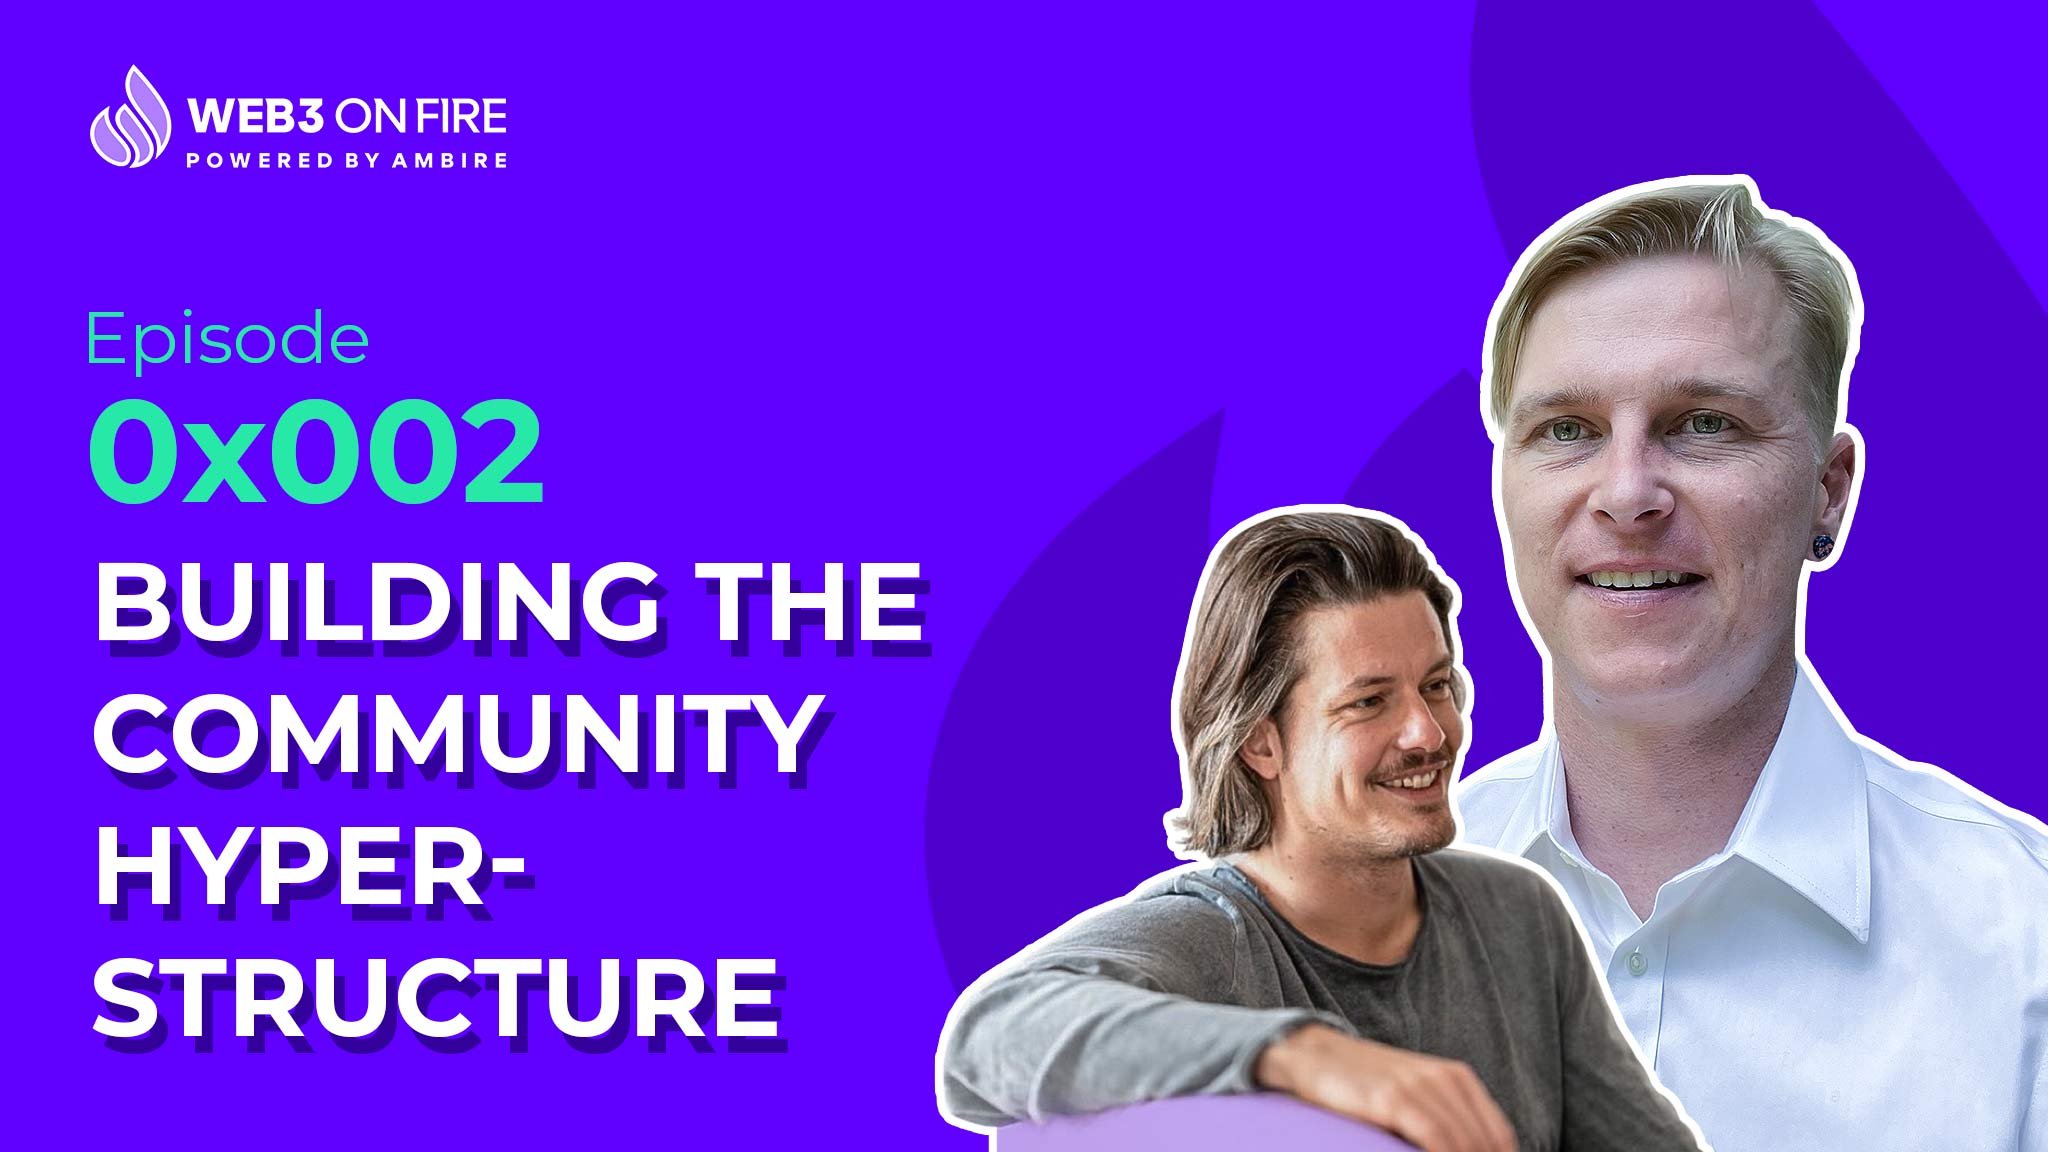 Web3 on Fire: Building the Community Hyperstructure